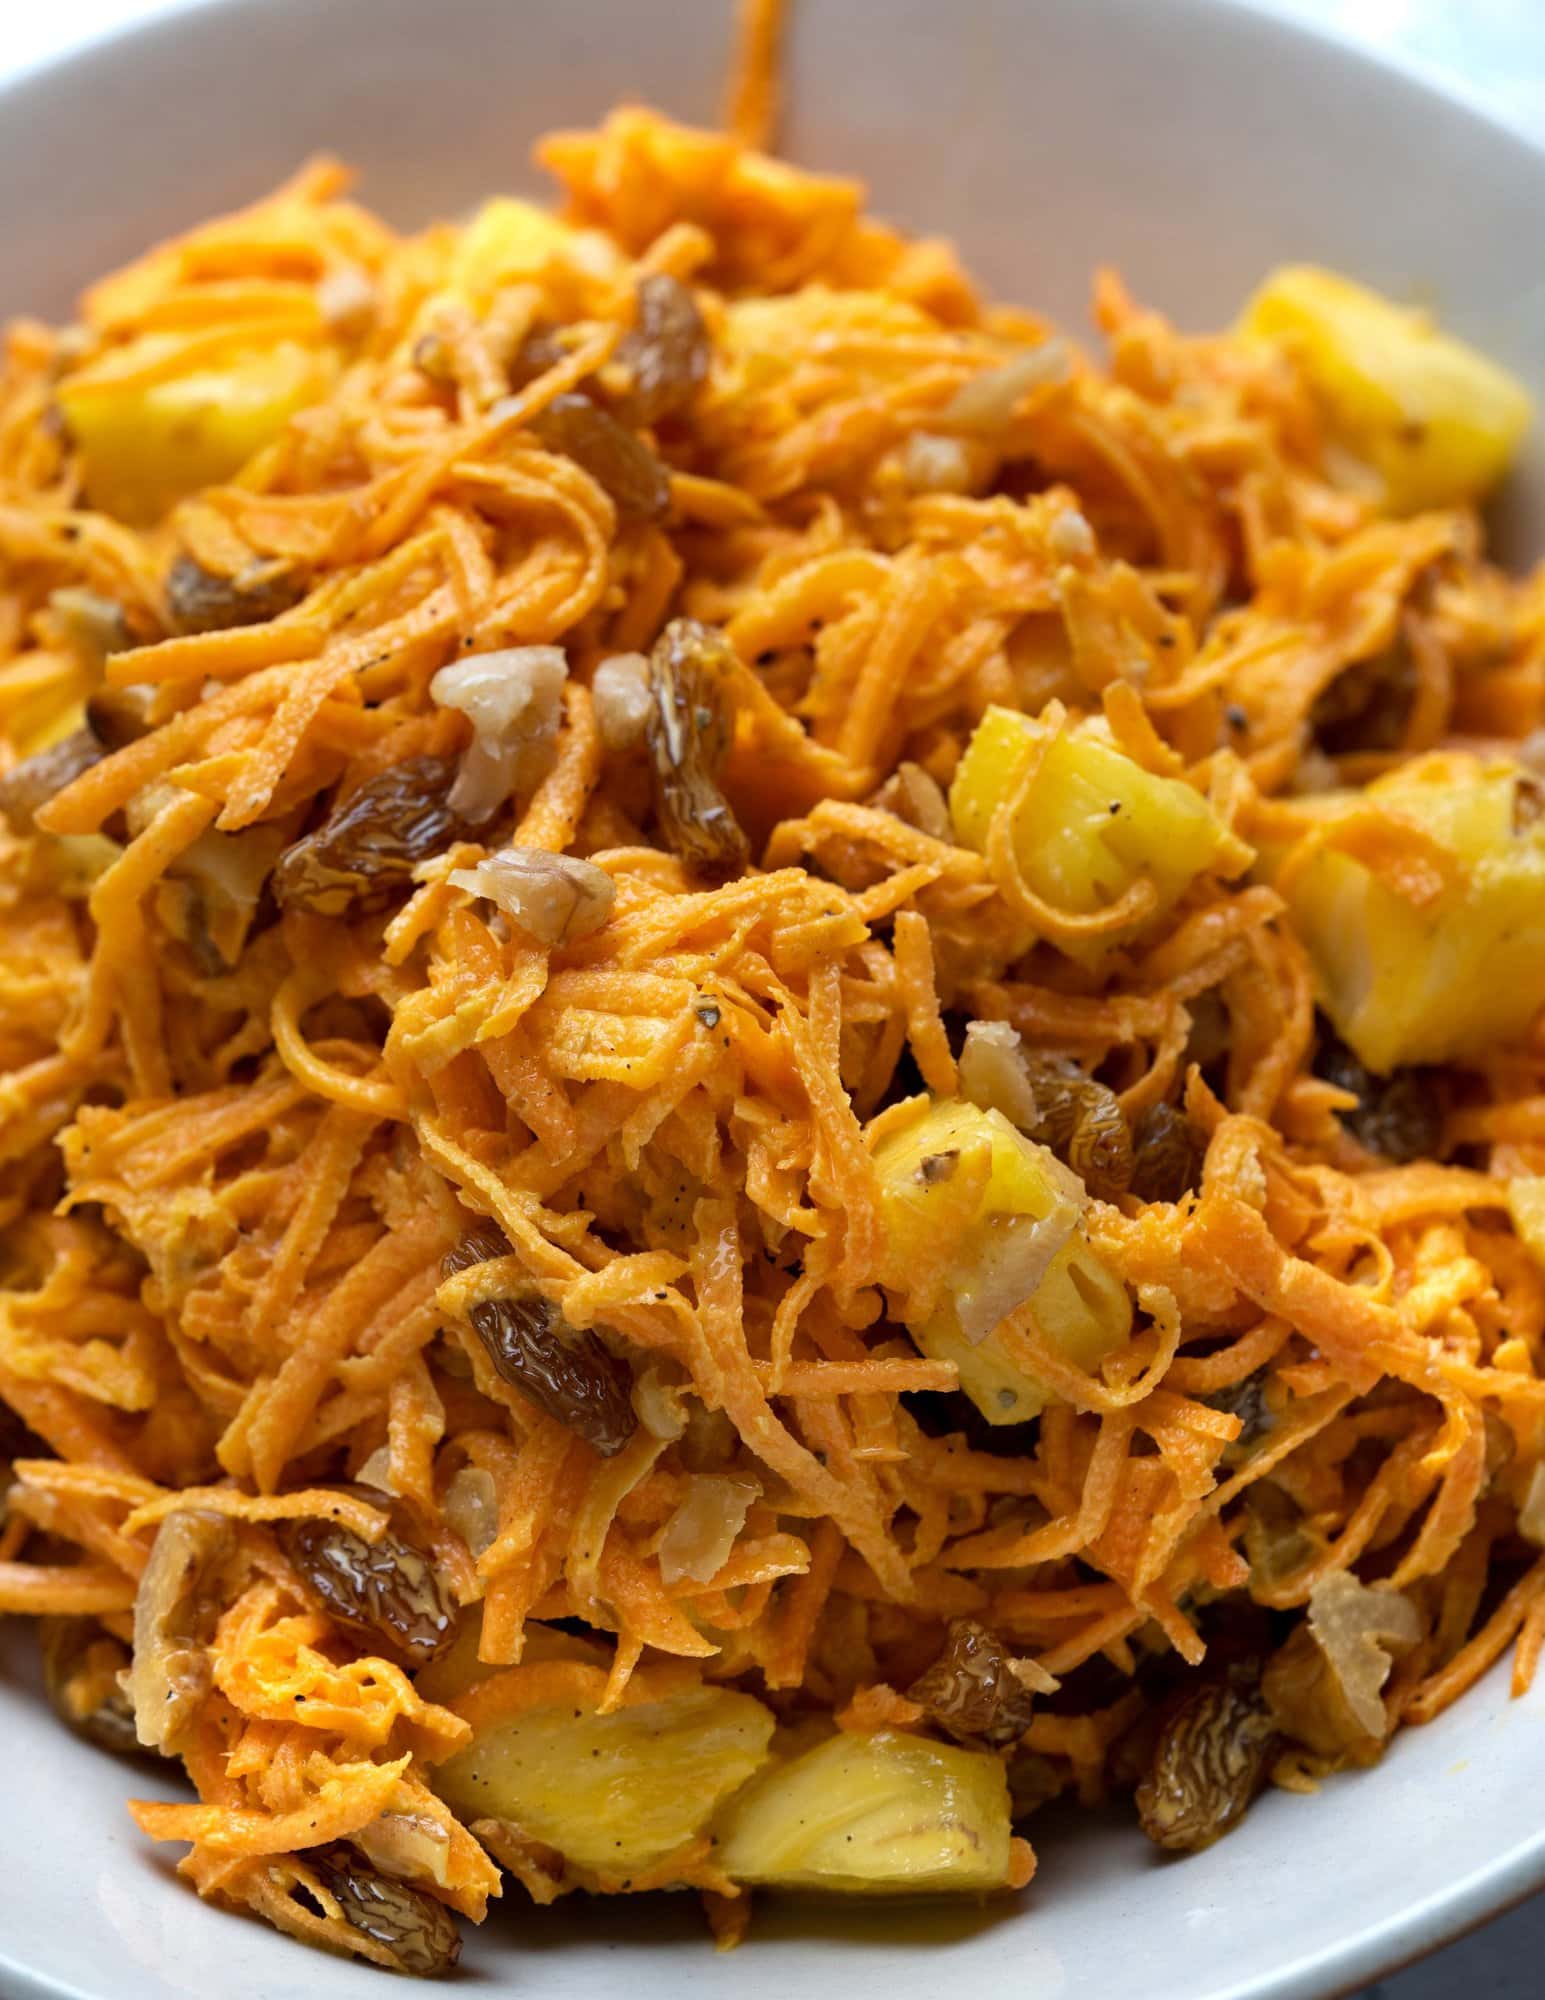 Close view of creamy carrot salad shows shredded carrots, raisins, chopped pineapple and walnuts coated in a creamy mayo dressing with mediterranean flavors.